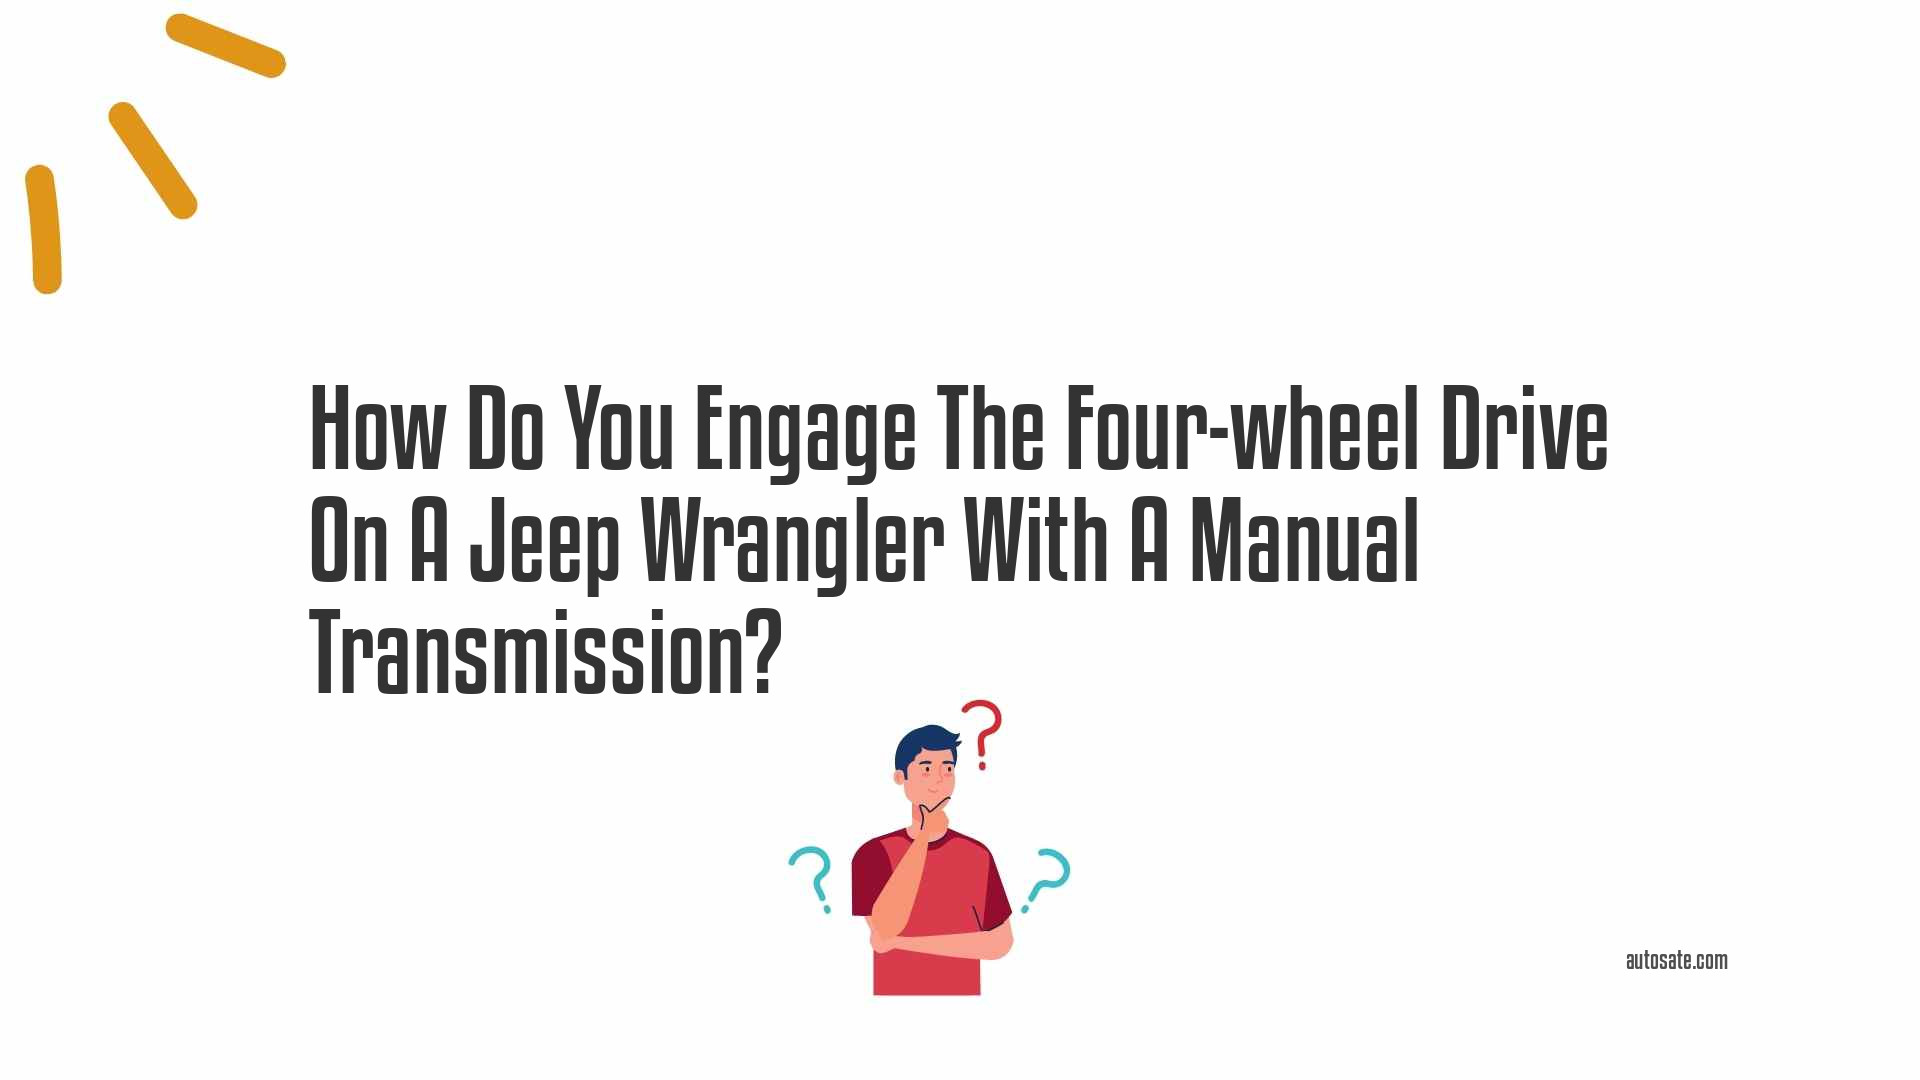 How Do You Engage The Four-wheel Drive On A Jeep Wrangler With A Manual Transmission?